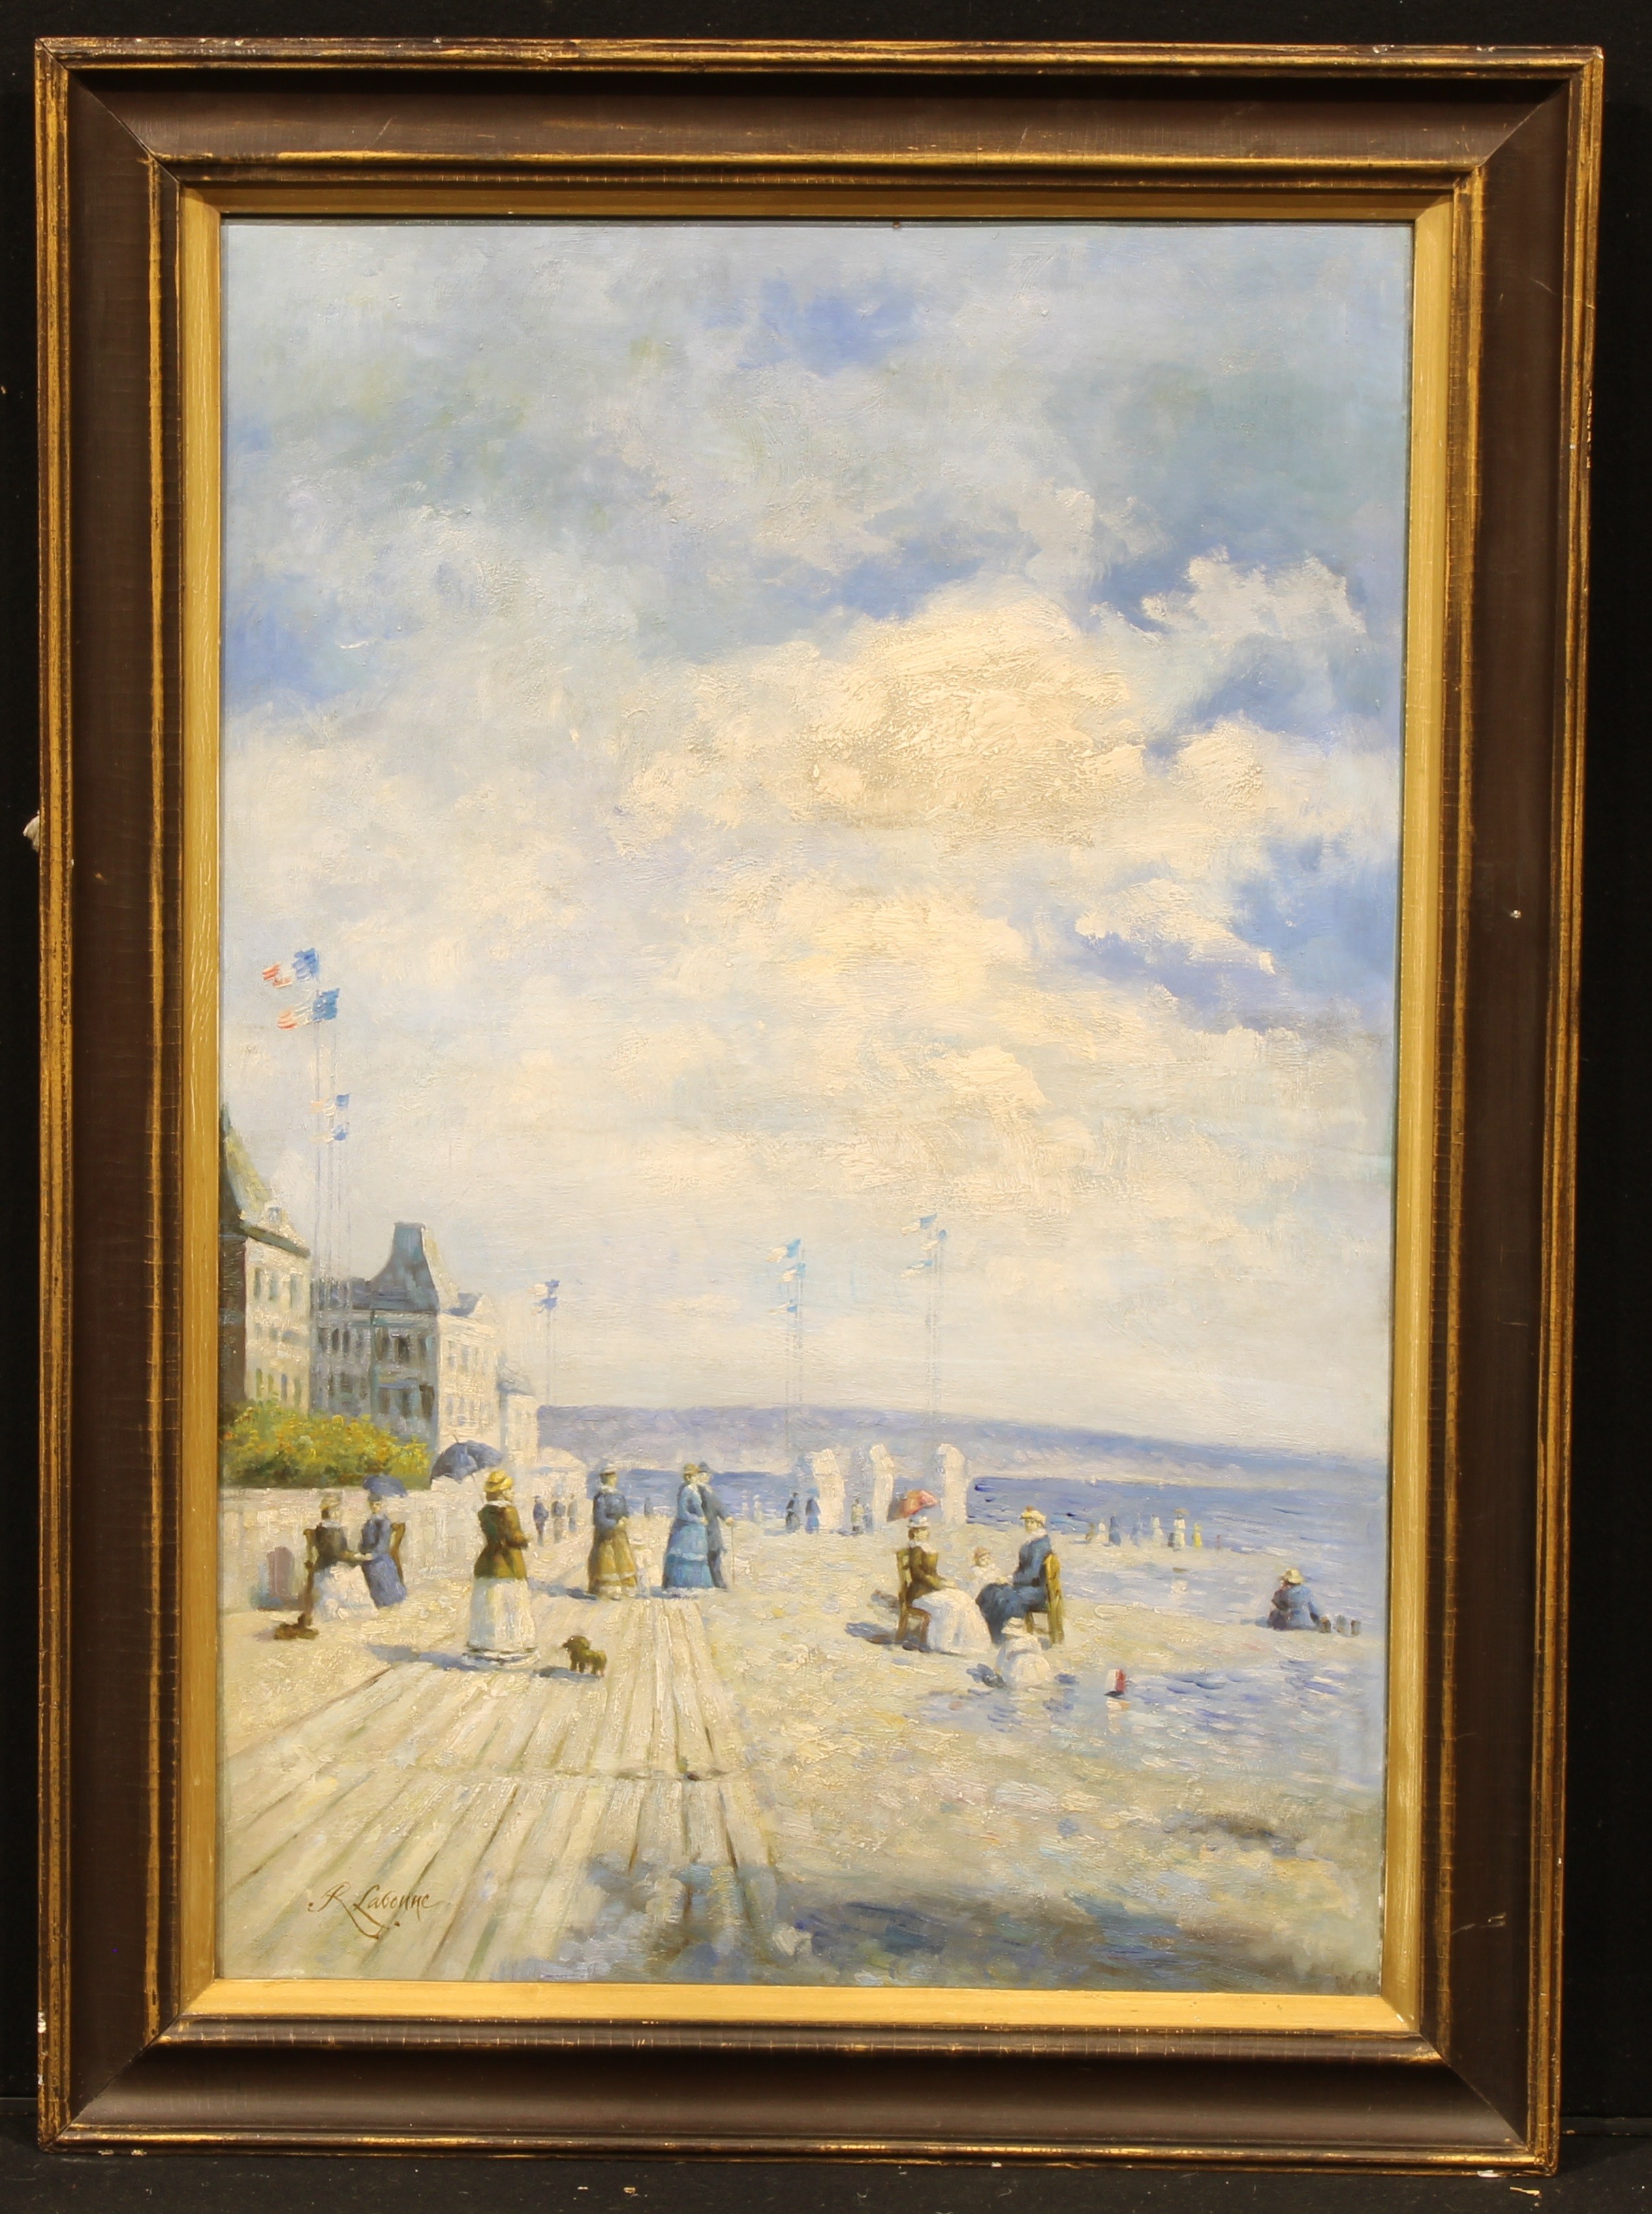 R Labonne (20th century) Seaside Promenade, after Charles Hoffbauer signed, oil on canvas, 90cm x - Image 2 of 4